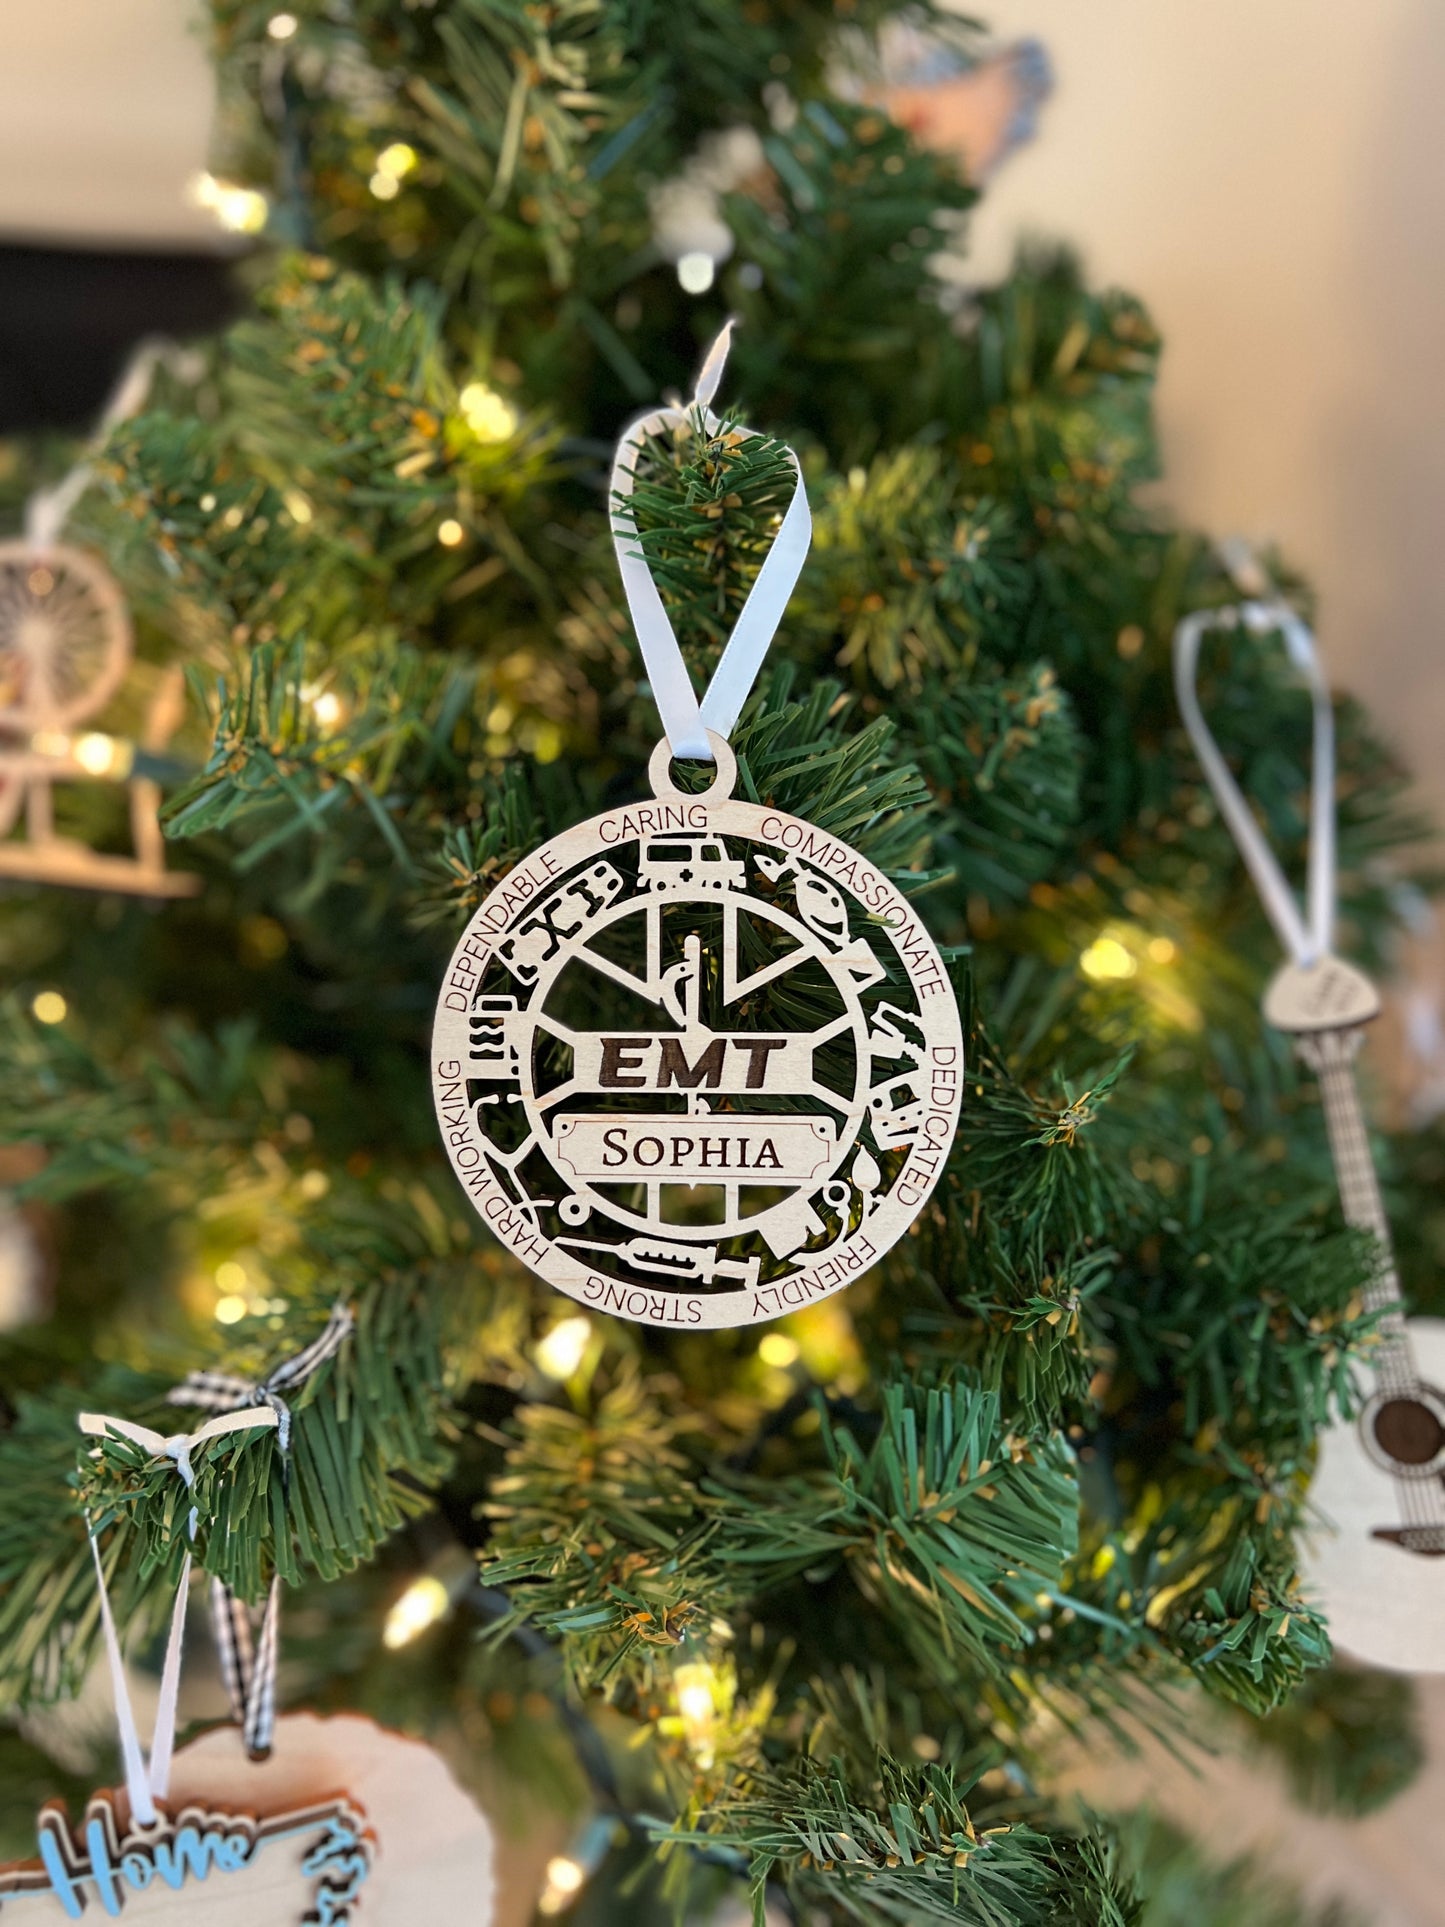 Personalized EMT Ornaments!